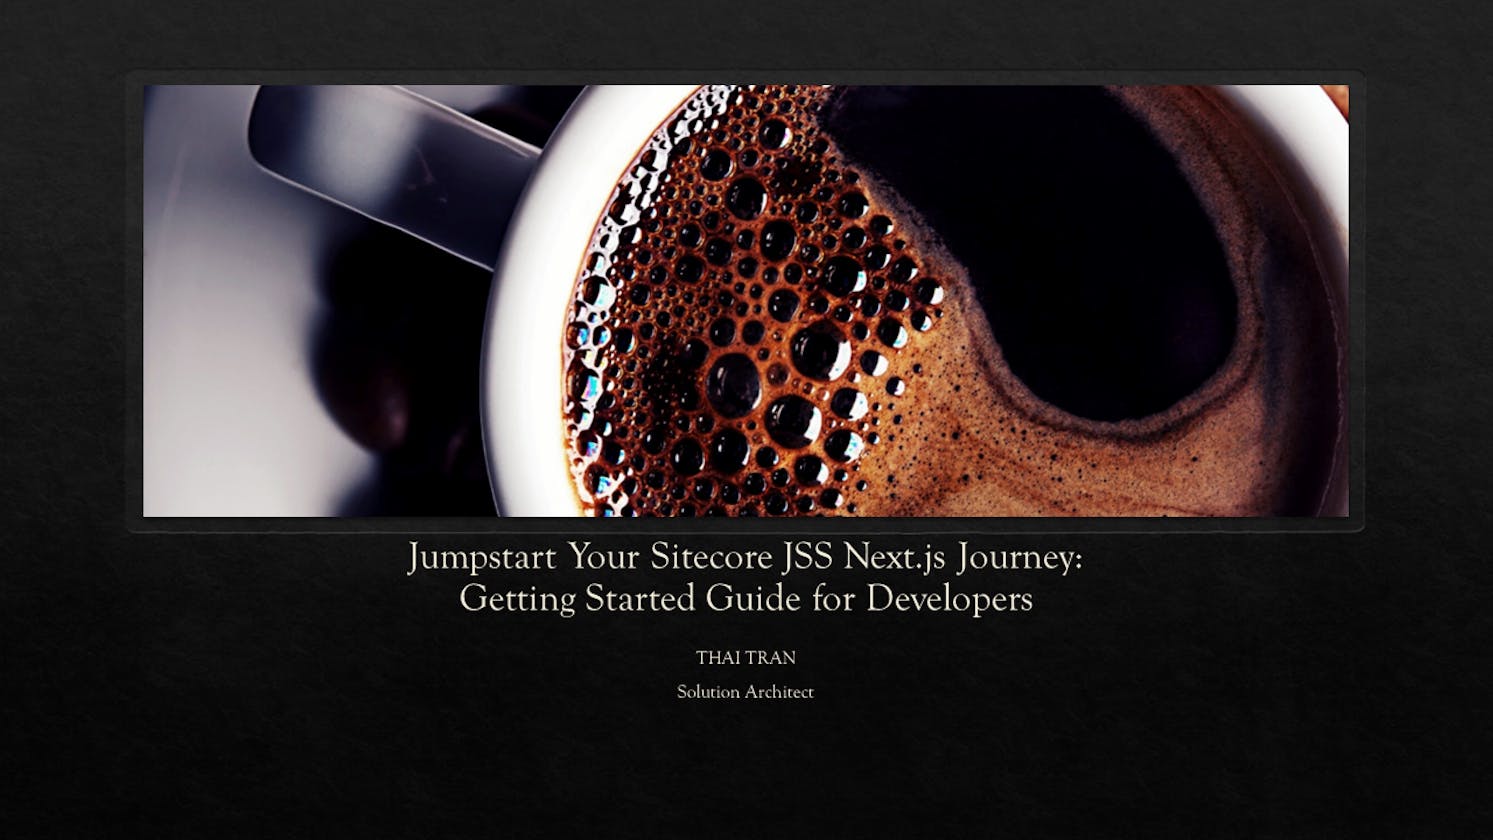 Jumpstart Your Sitecore JSS Next.js Journey: Getting Started Guide for Developers